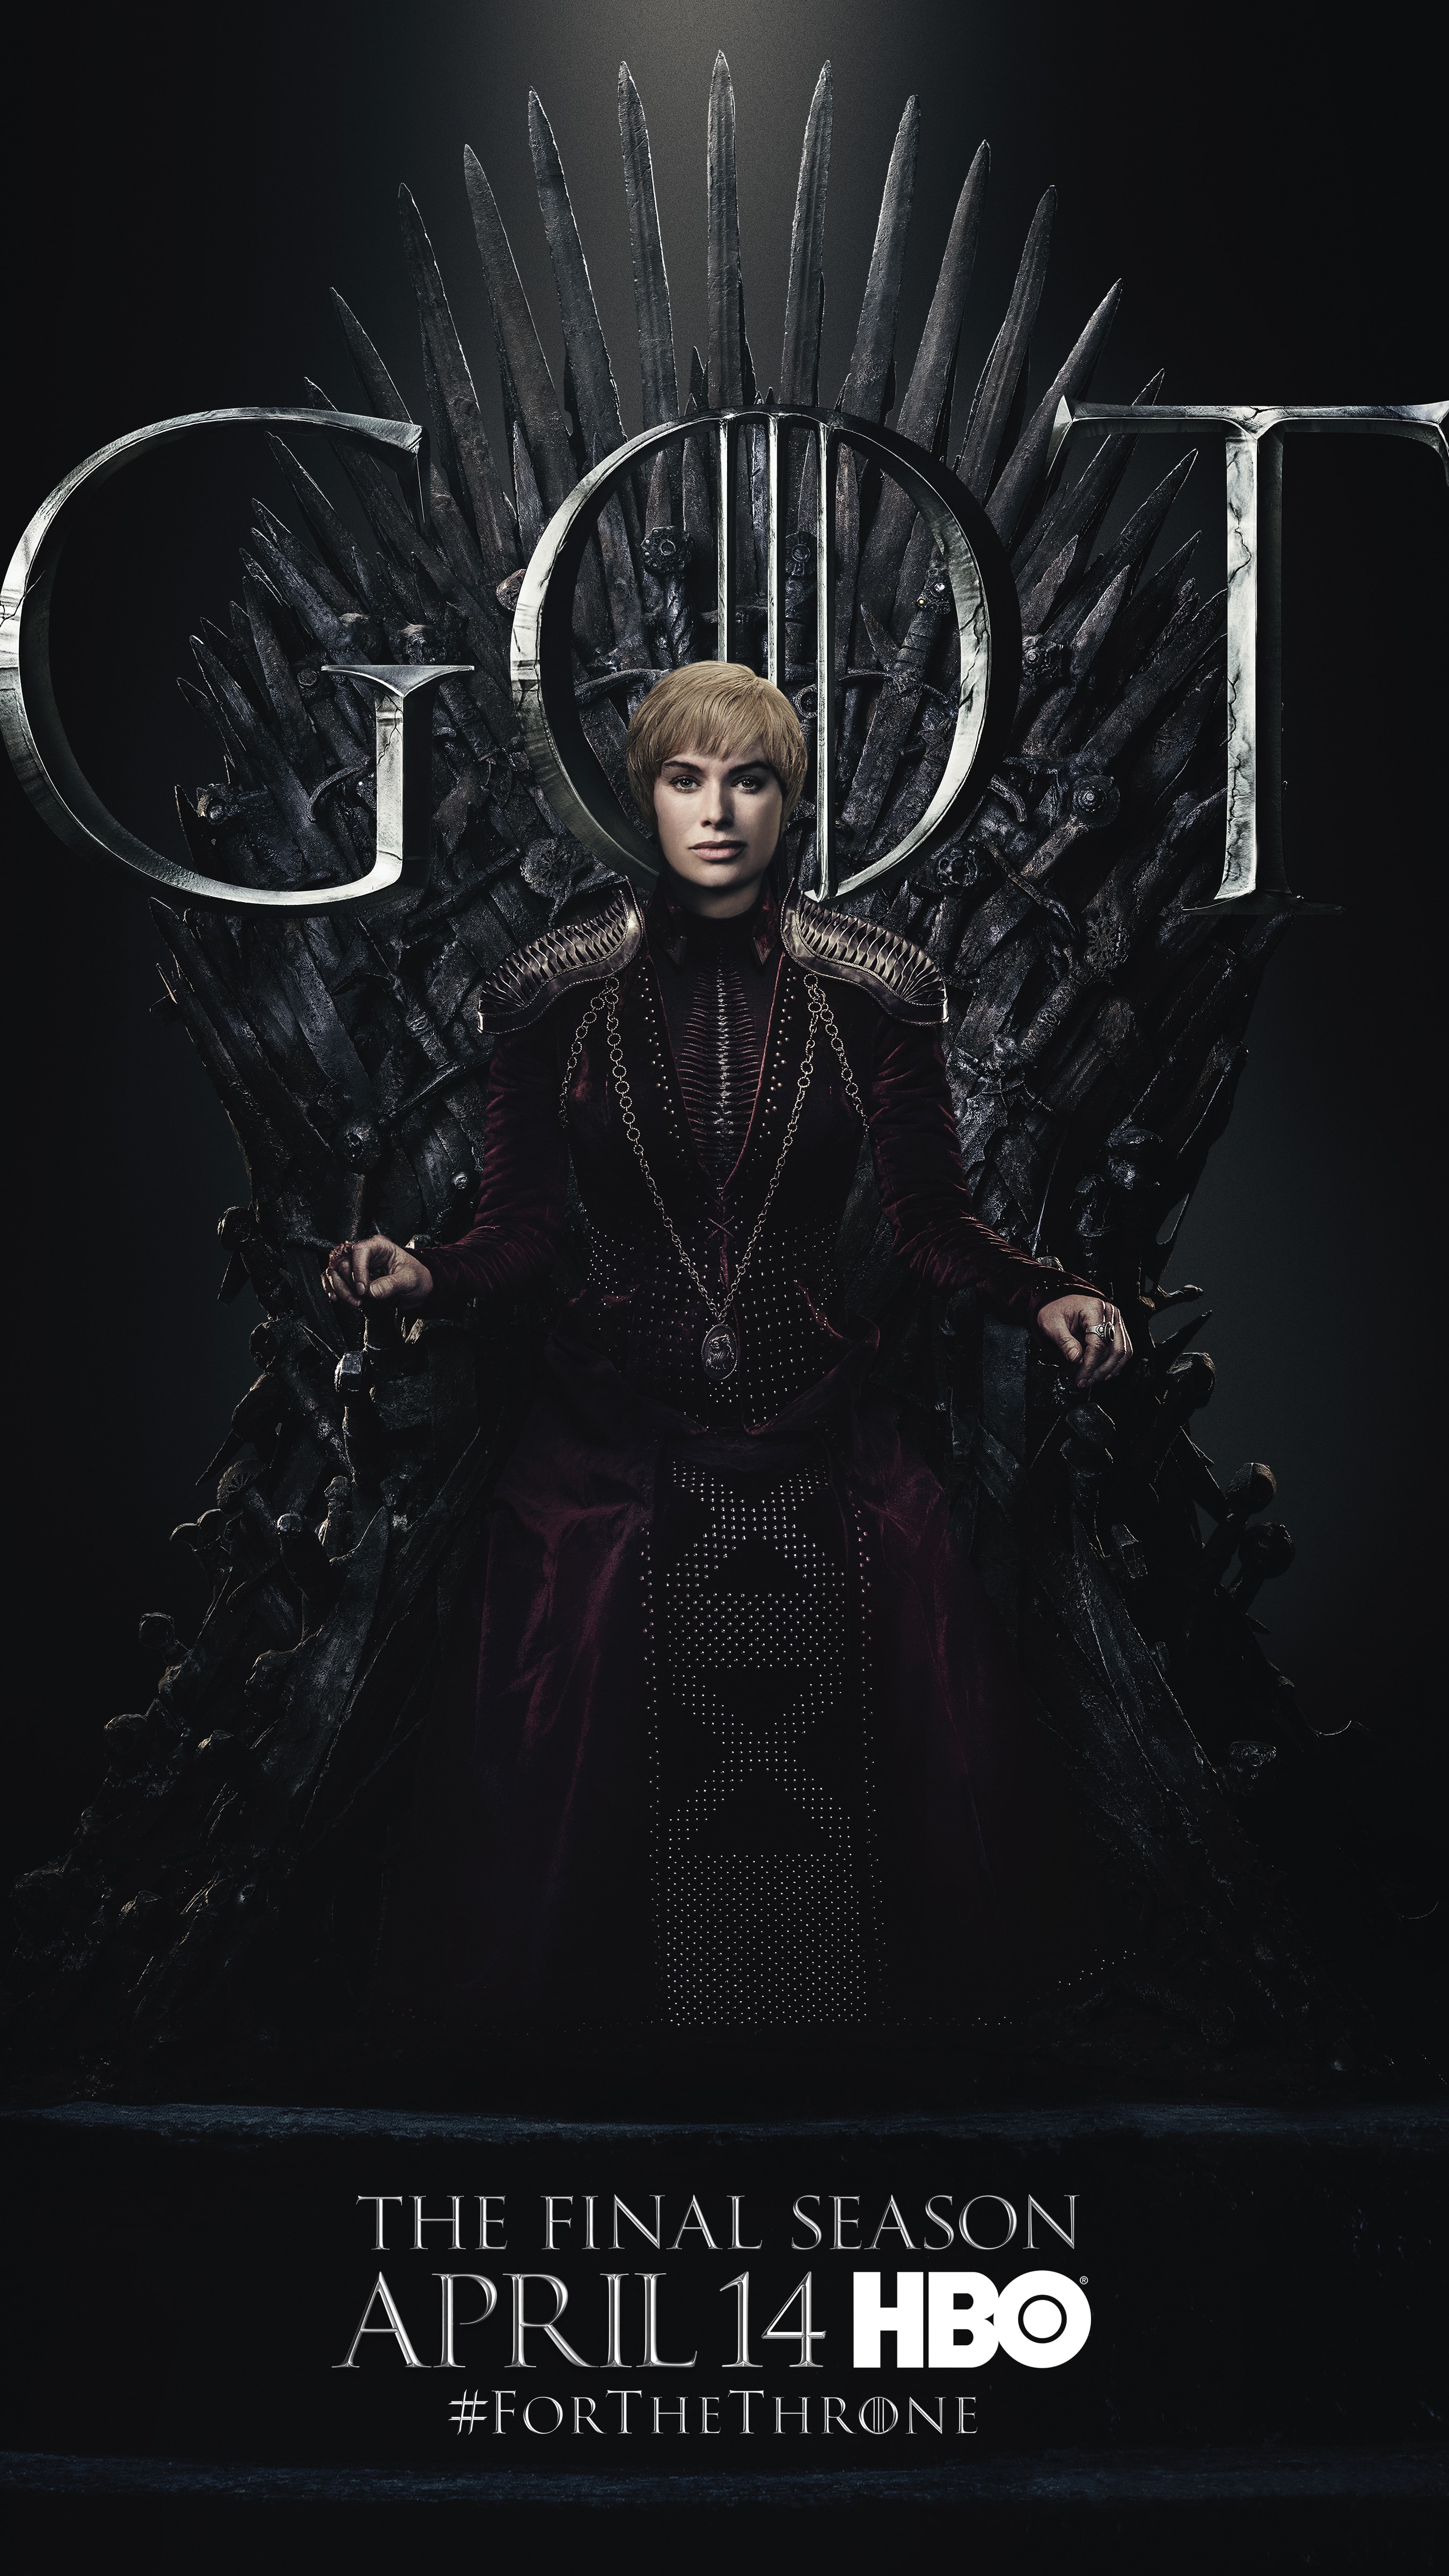 https://rozup.ir/up/justbarca/GOTS08/3.-Cersei-Lannister-GOT-Season-8-For-The-Throne-Character-Poster-min.jpg